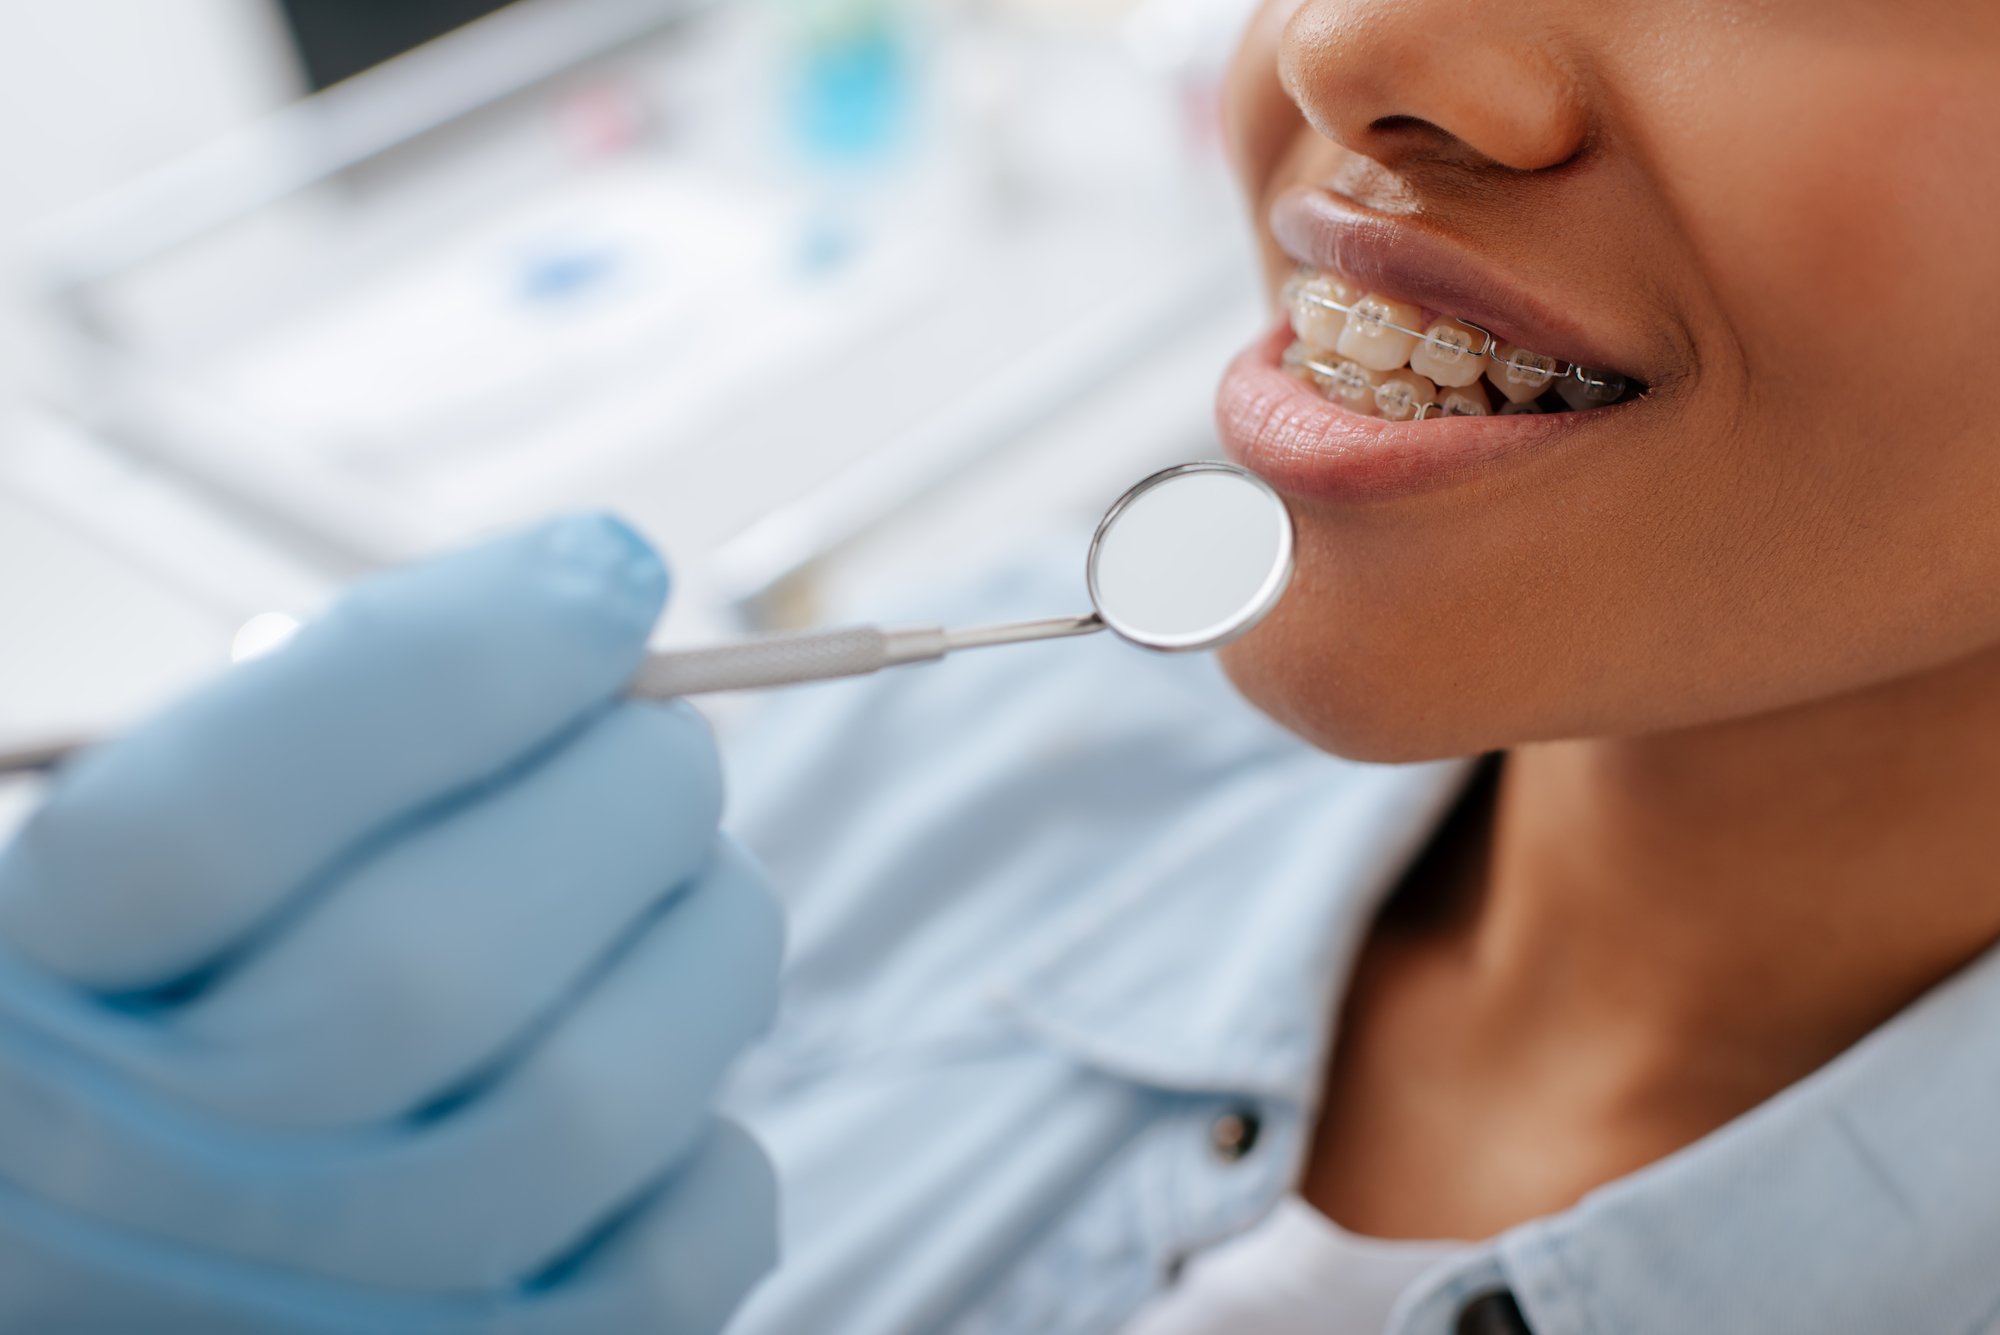 SecureDental PPO Plans: Coverage, costs, and benefits explained